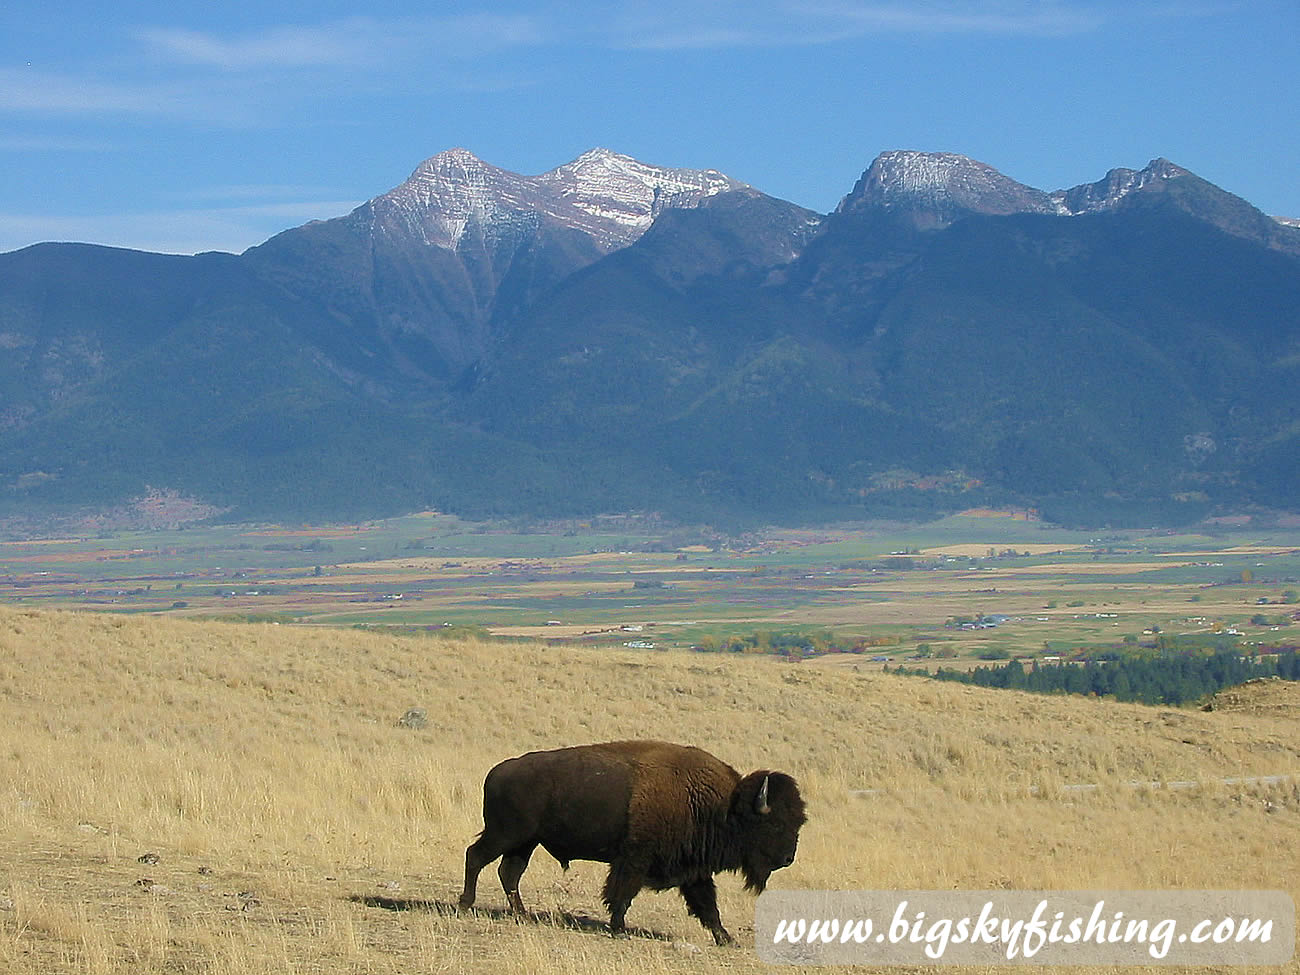 Bison at the National Bison Range in Montana